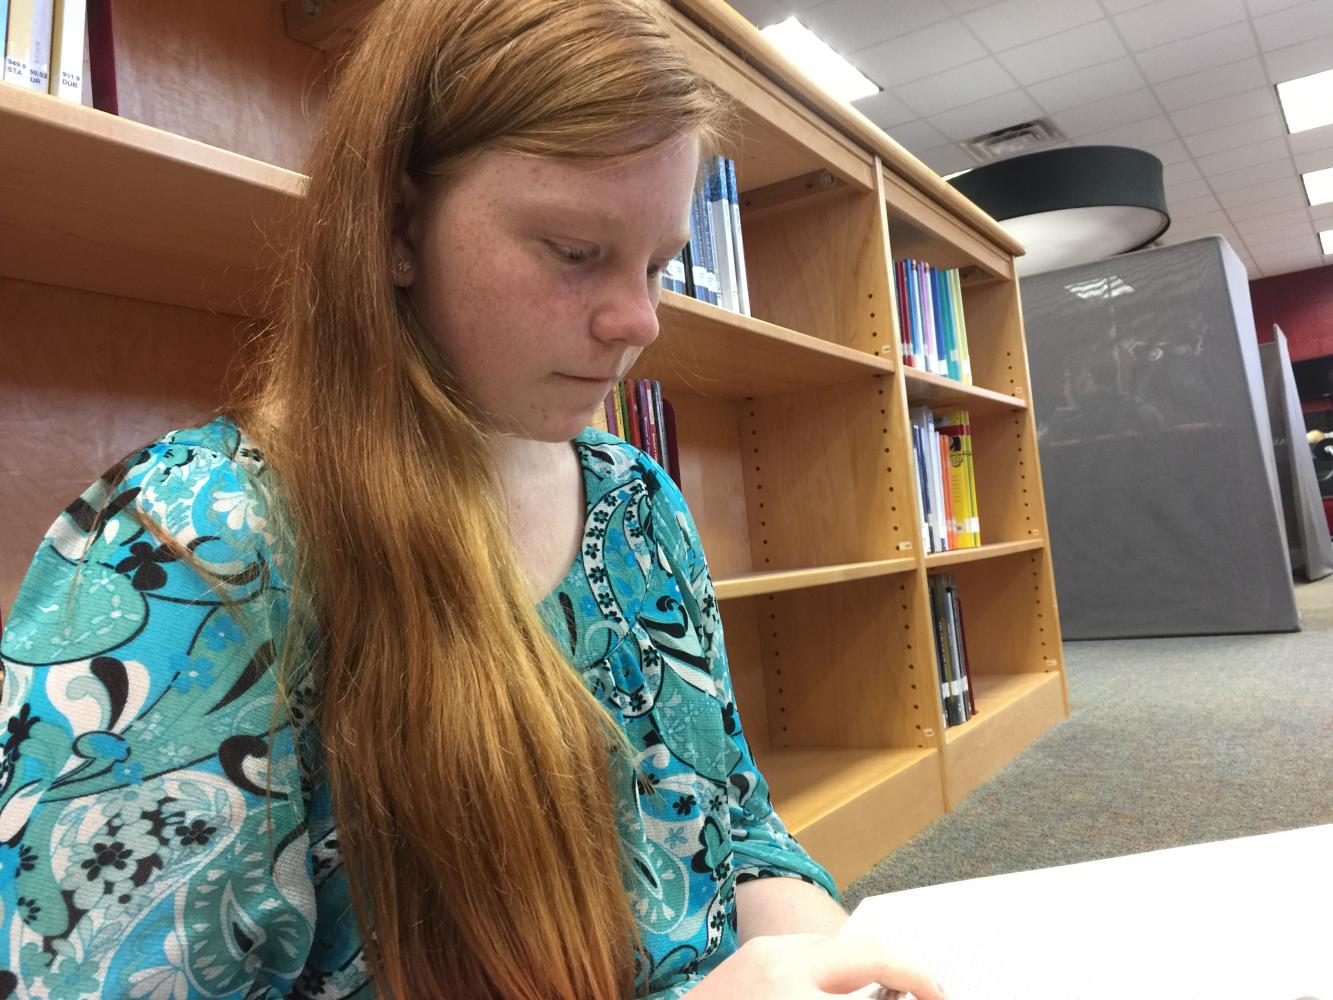 Olivia Sullivan is one of the many students who utilize Lamberts library. Which do you prefer: paper books or e-books?